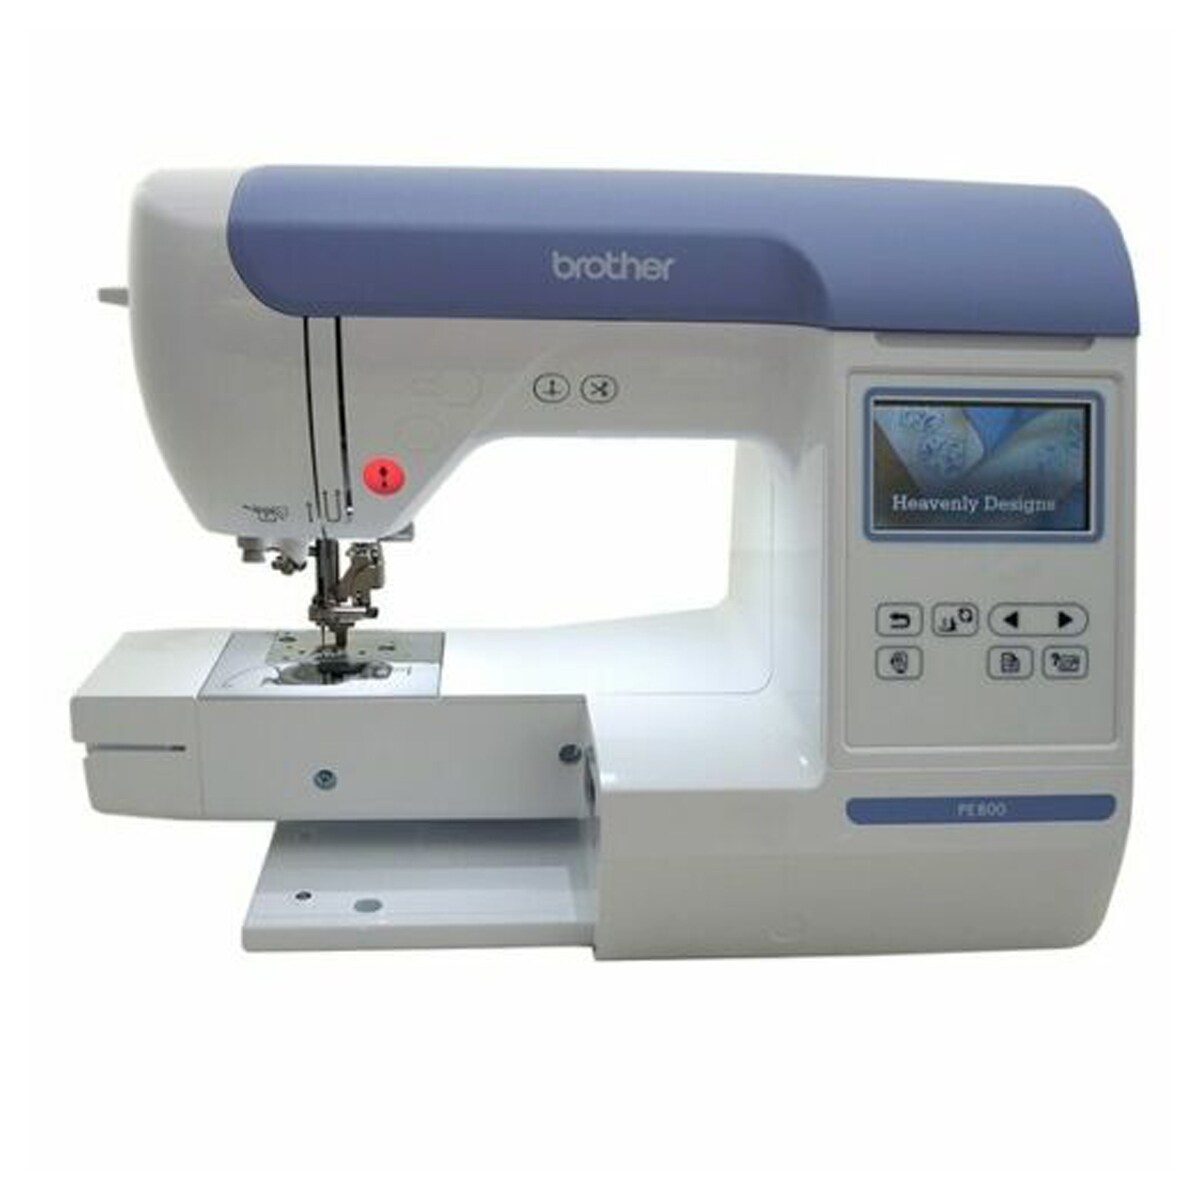 Original 2020/2021 Brother PE800 5 x 7 Embroidery Machine with Large Color  Touch LCD Screen NEW at Rs 55000 in Nashik